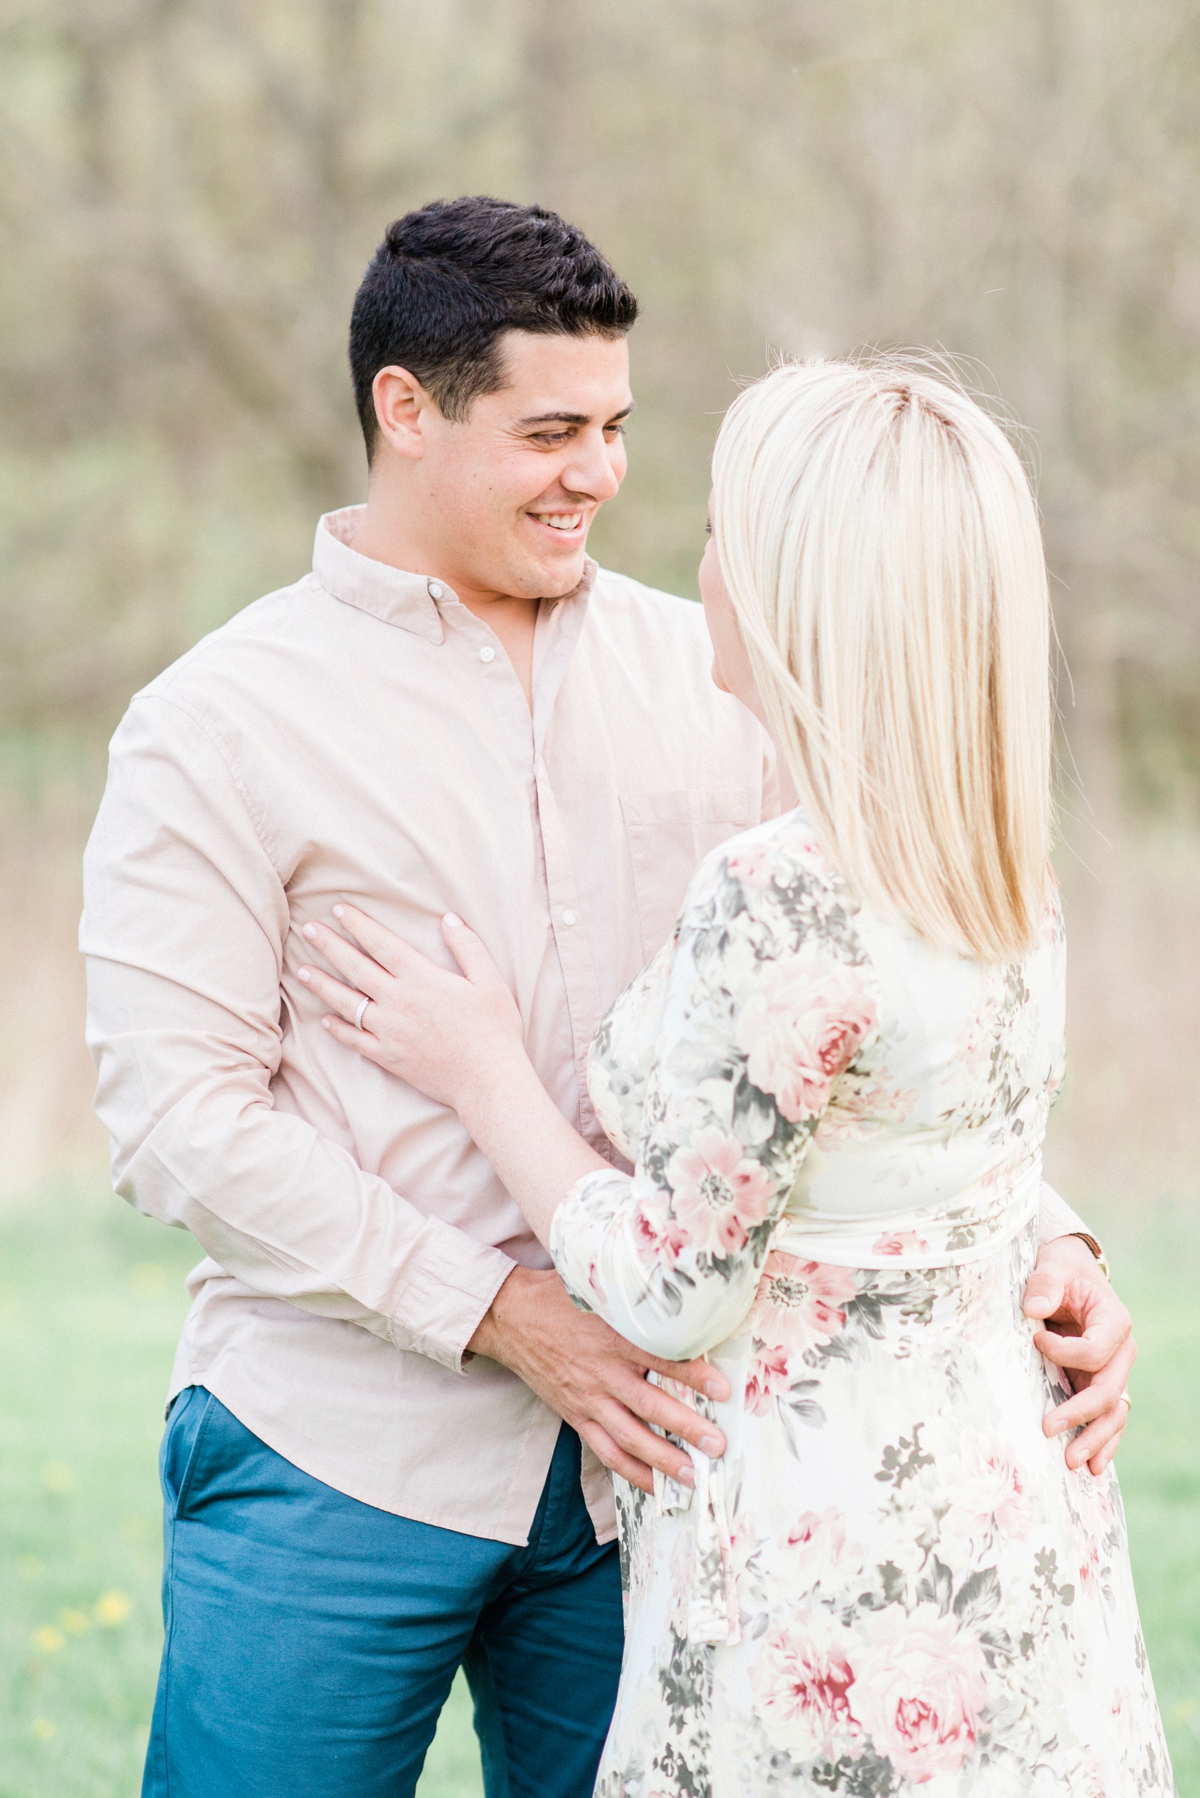 Where to take engagement + wedding photos in Chicago Suburbs